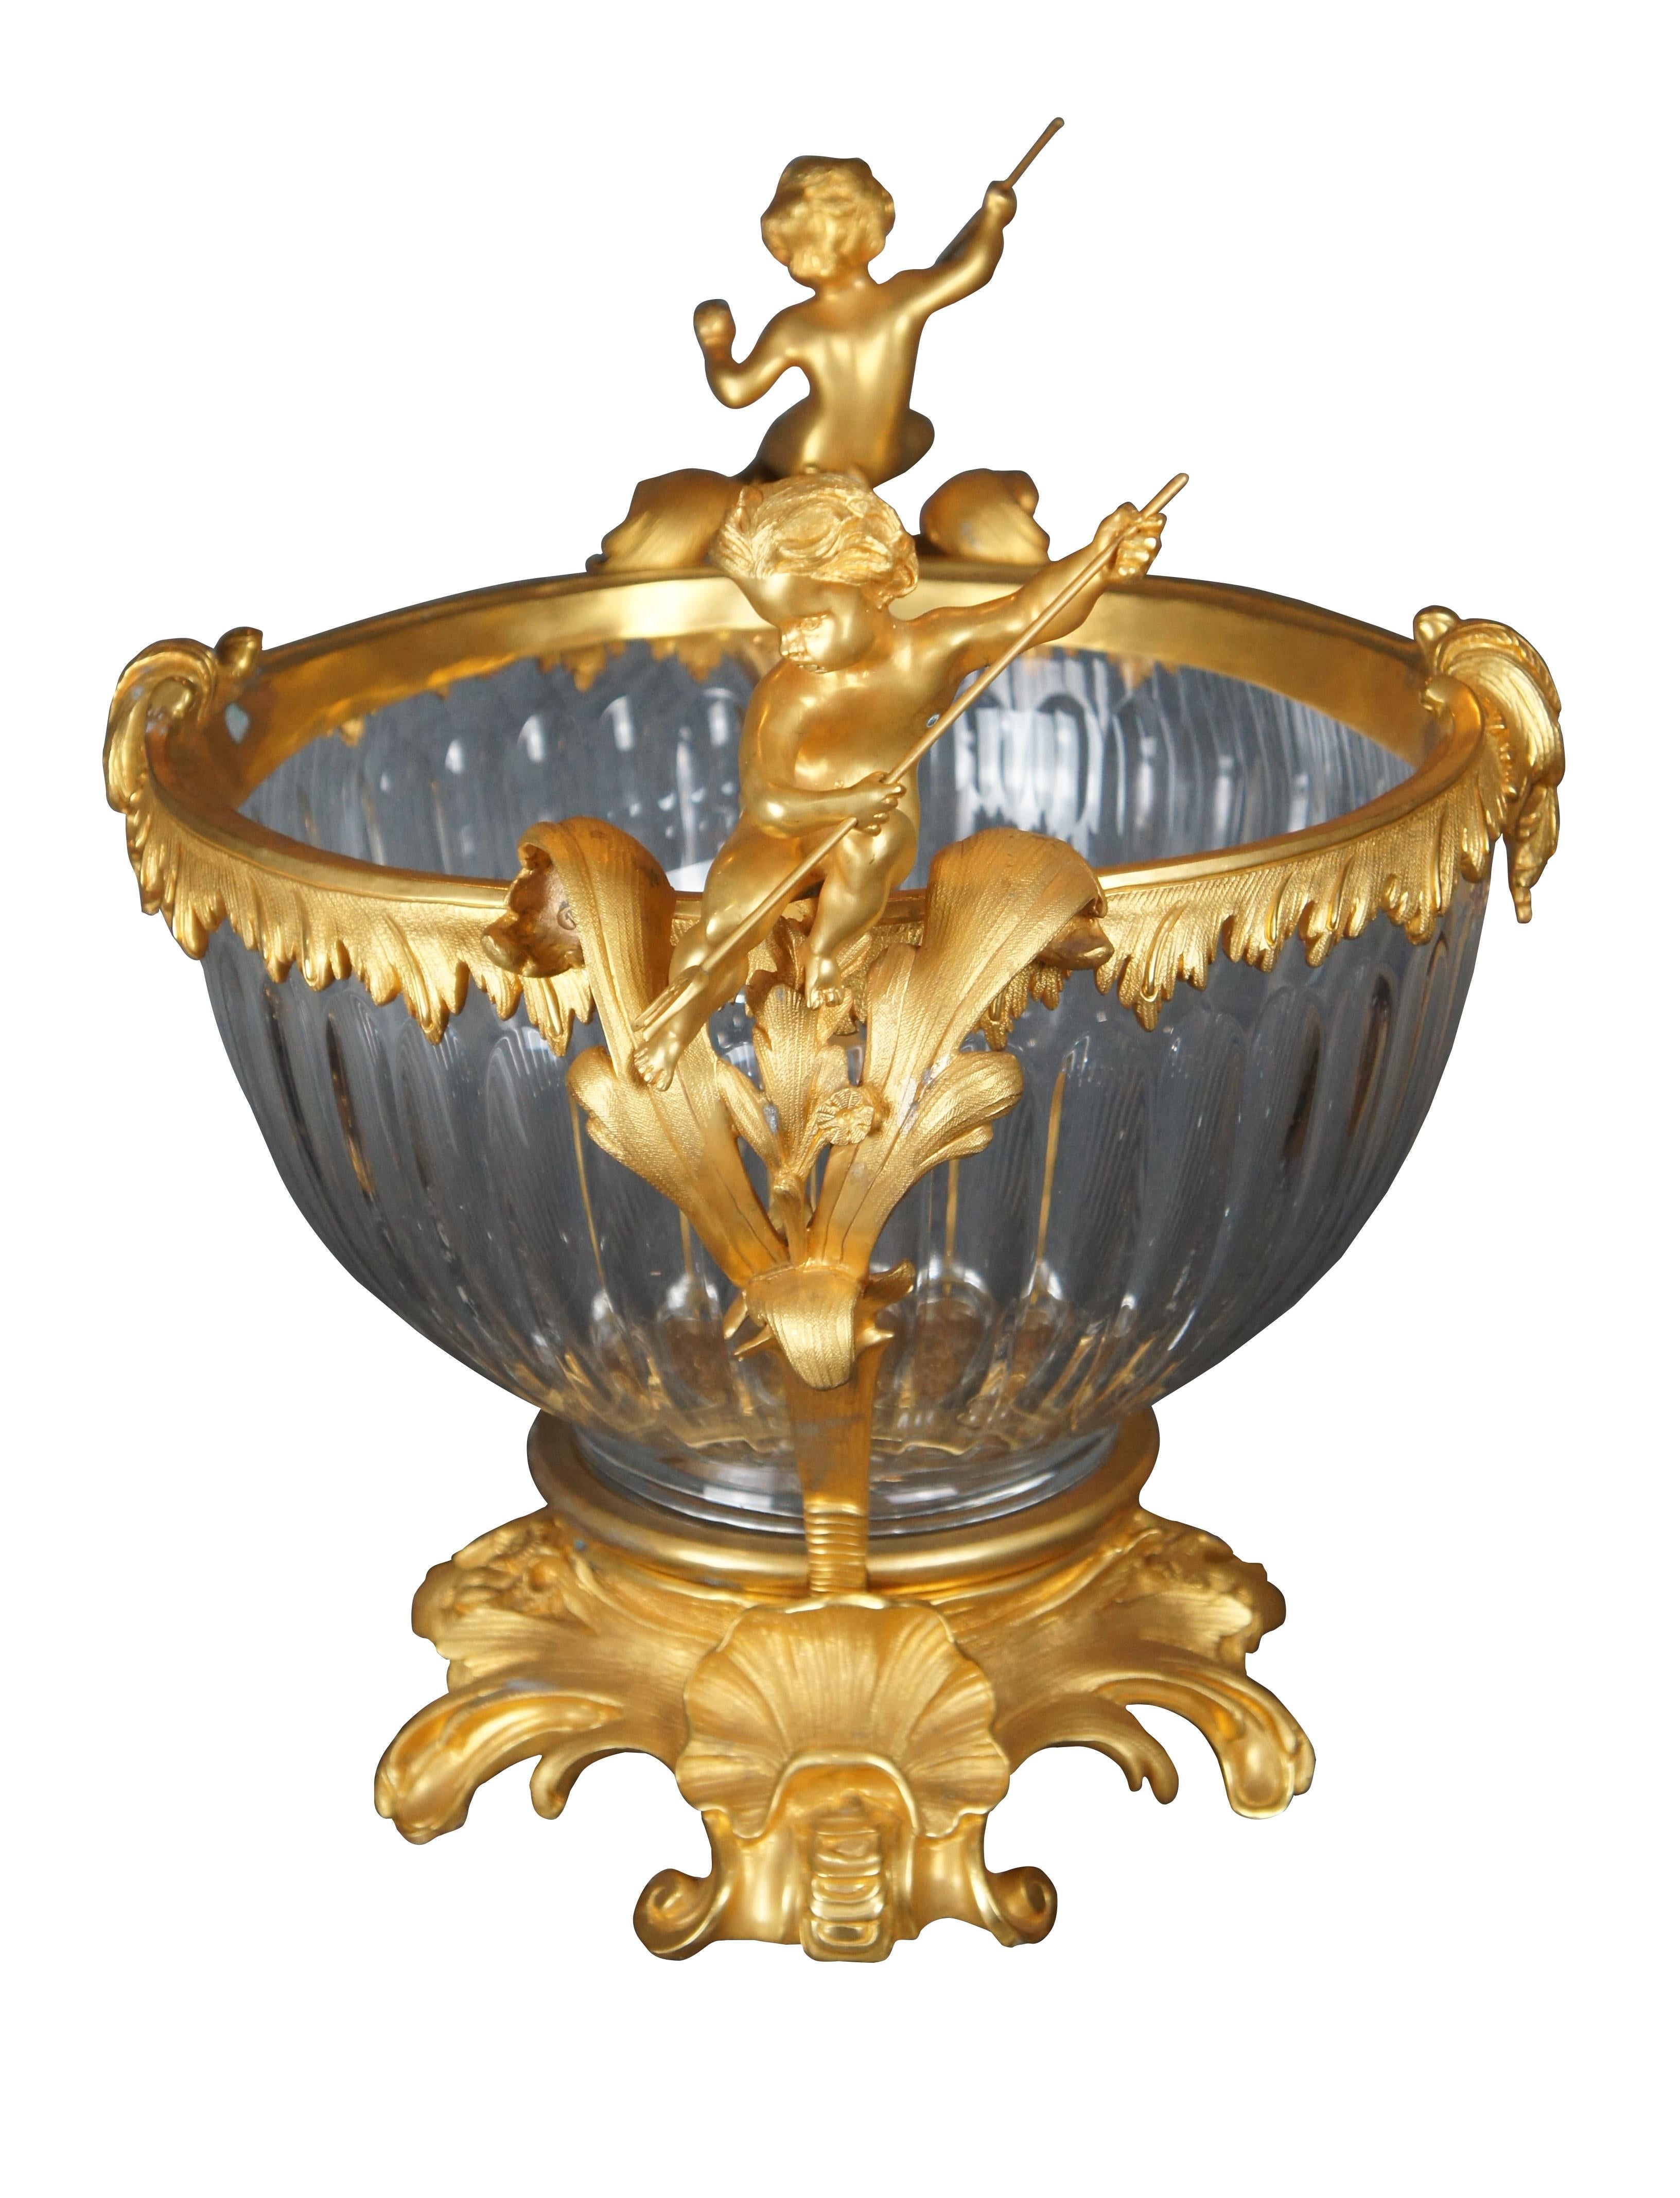 Late 20th Century Eric Stepnewski centerpiece bowl. Crafted from chiseled brass ormolu finished in 24k gold and crystal. Perfectly suited to function as a champagne bowl or simply as a decorative vase or centerpiece Features a gadrooned cut crystal